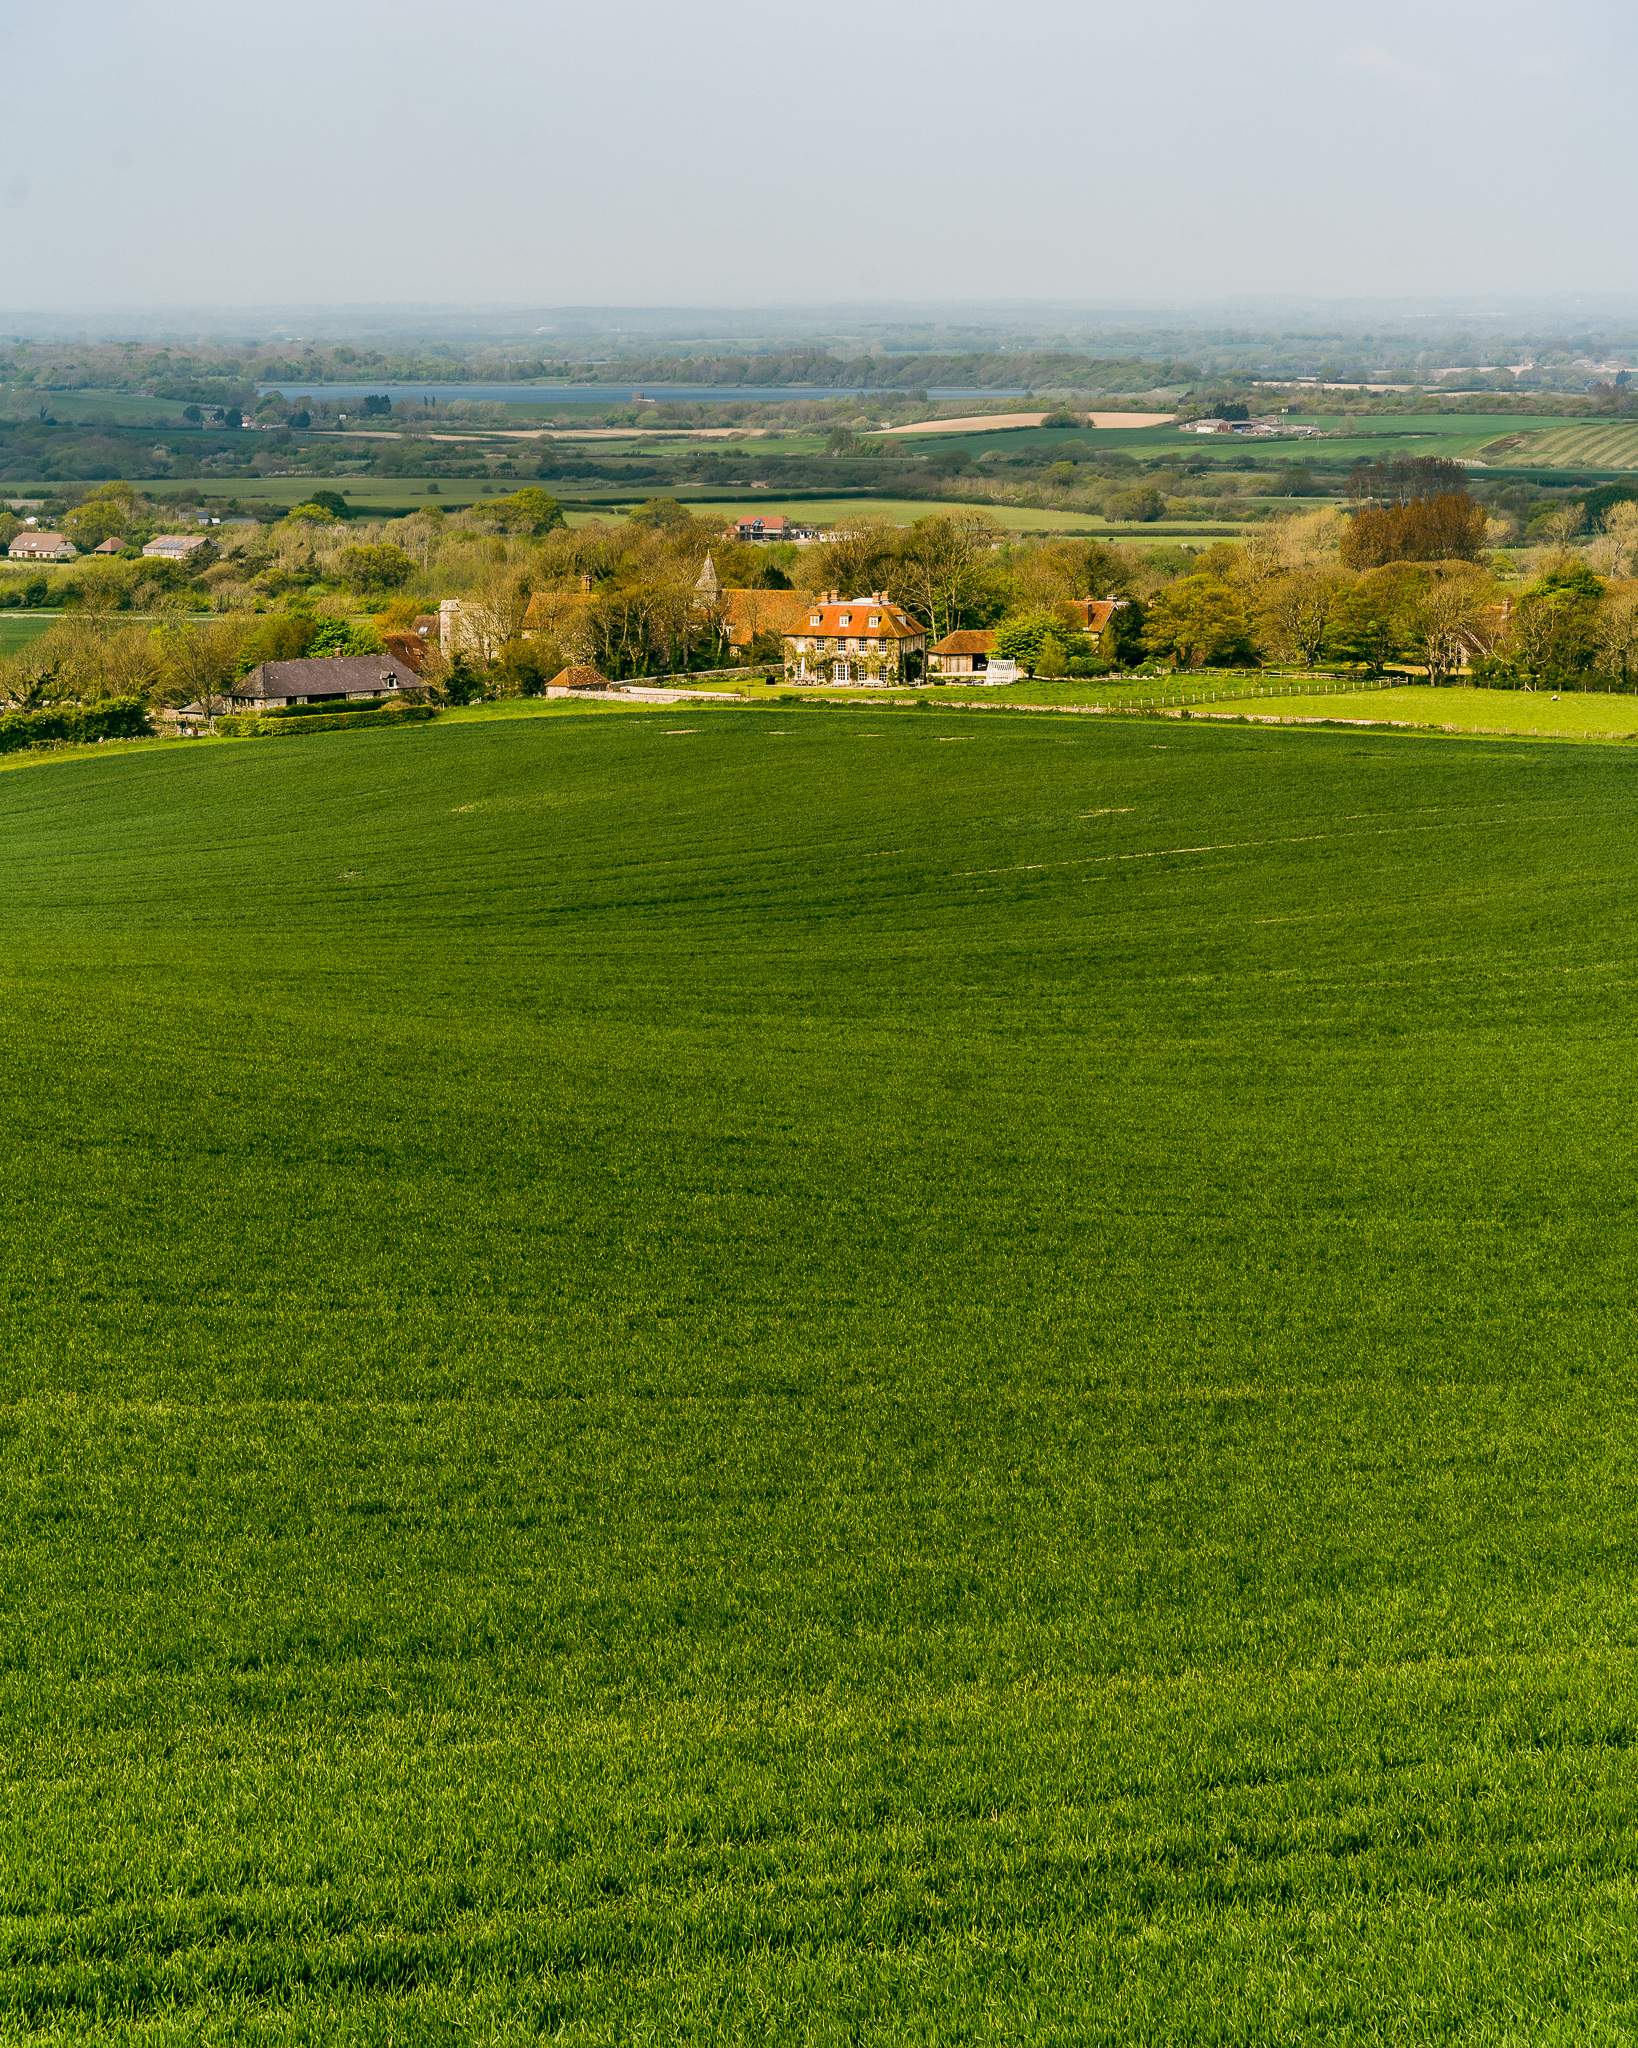 Farmlands stretching towards buildings of Wilmington village, East Sussex, England, UK